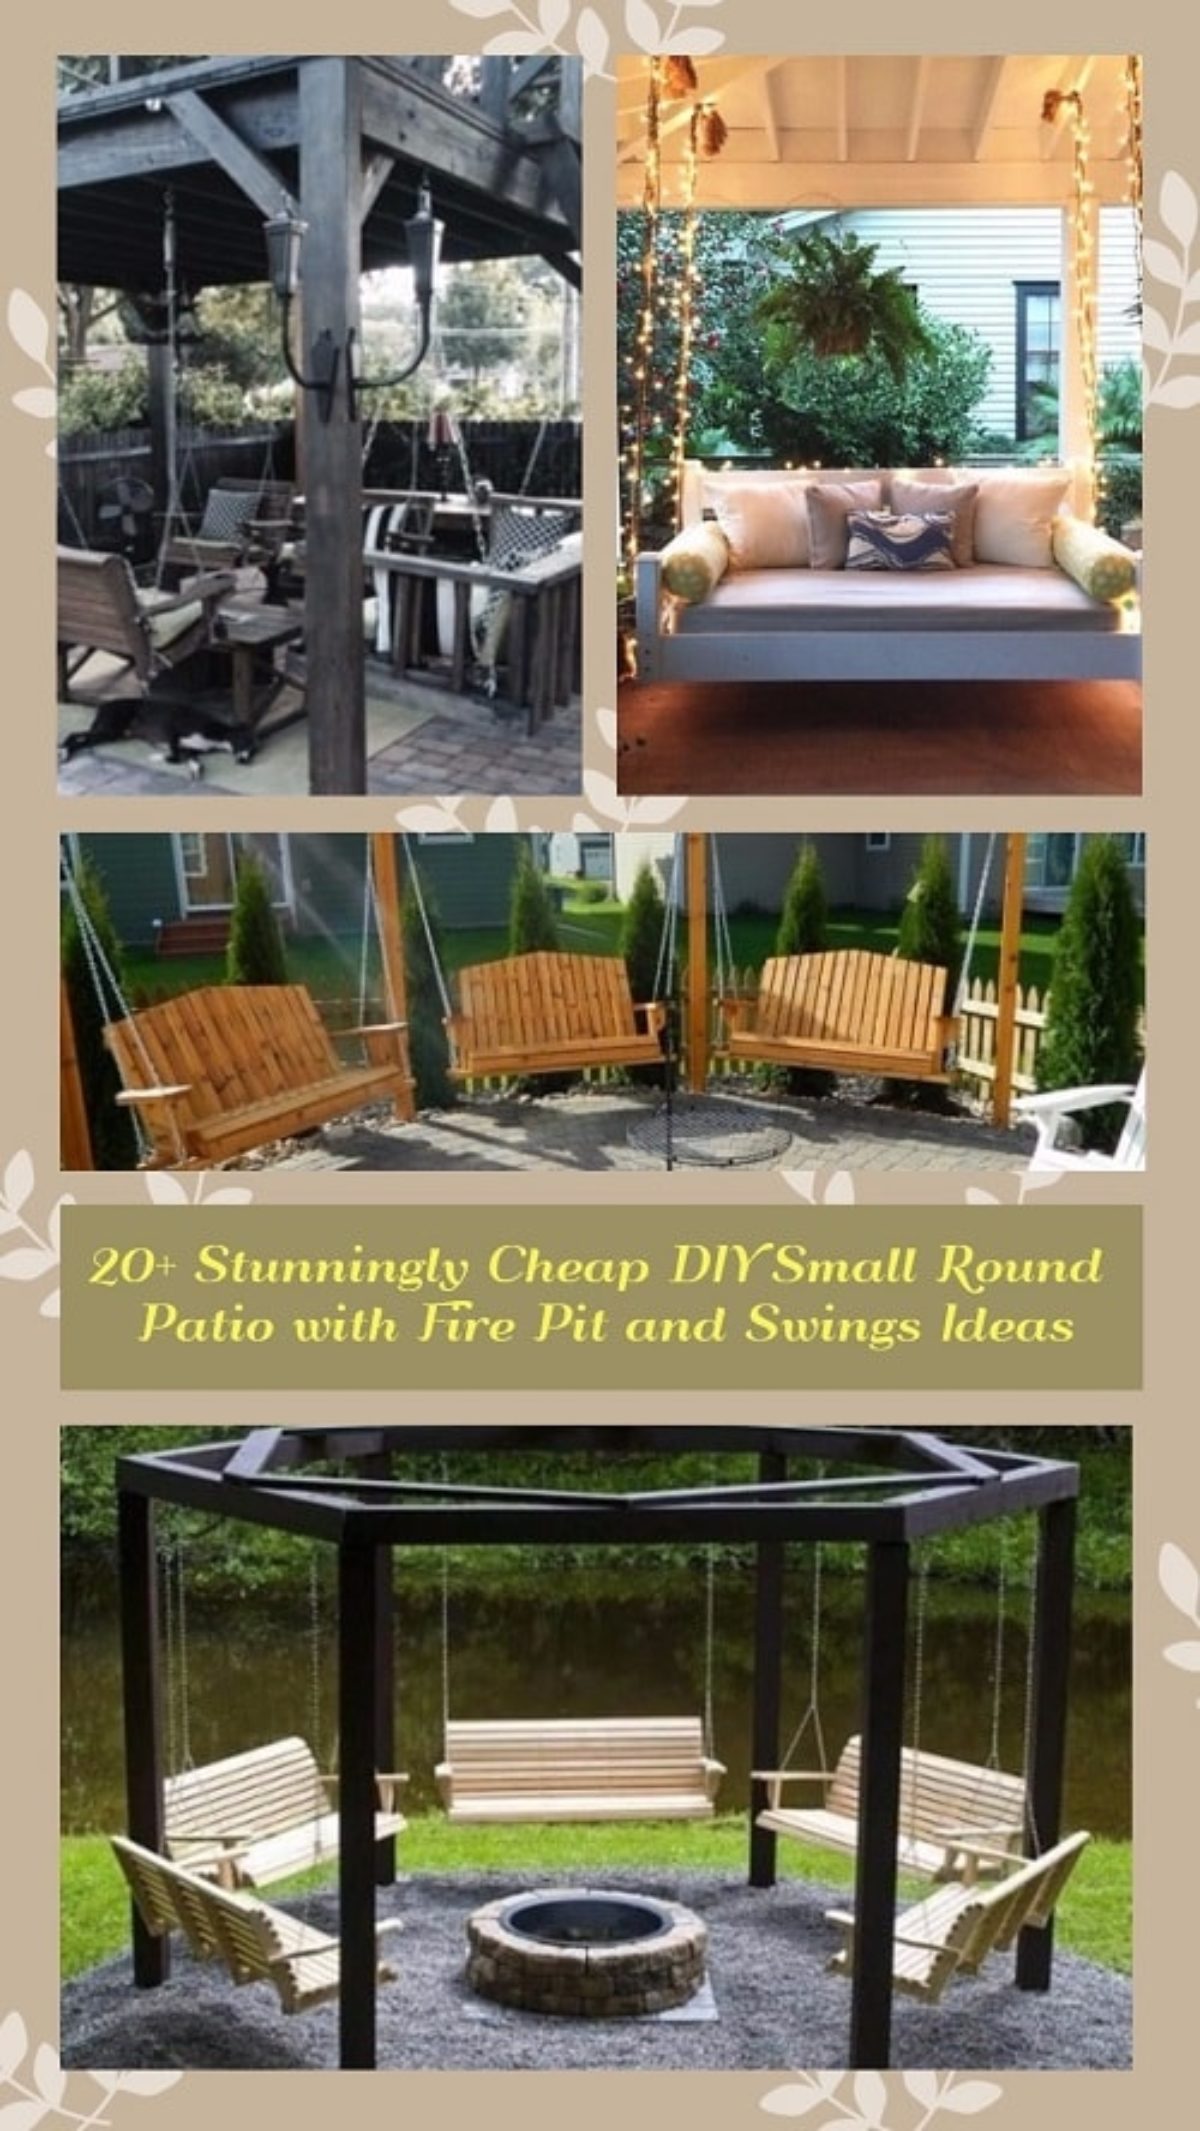 20 Stunningly Cheap Diy Small Round Patio With Fire Pit And Swings